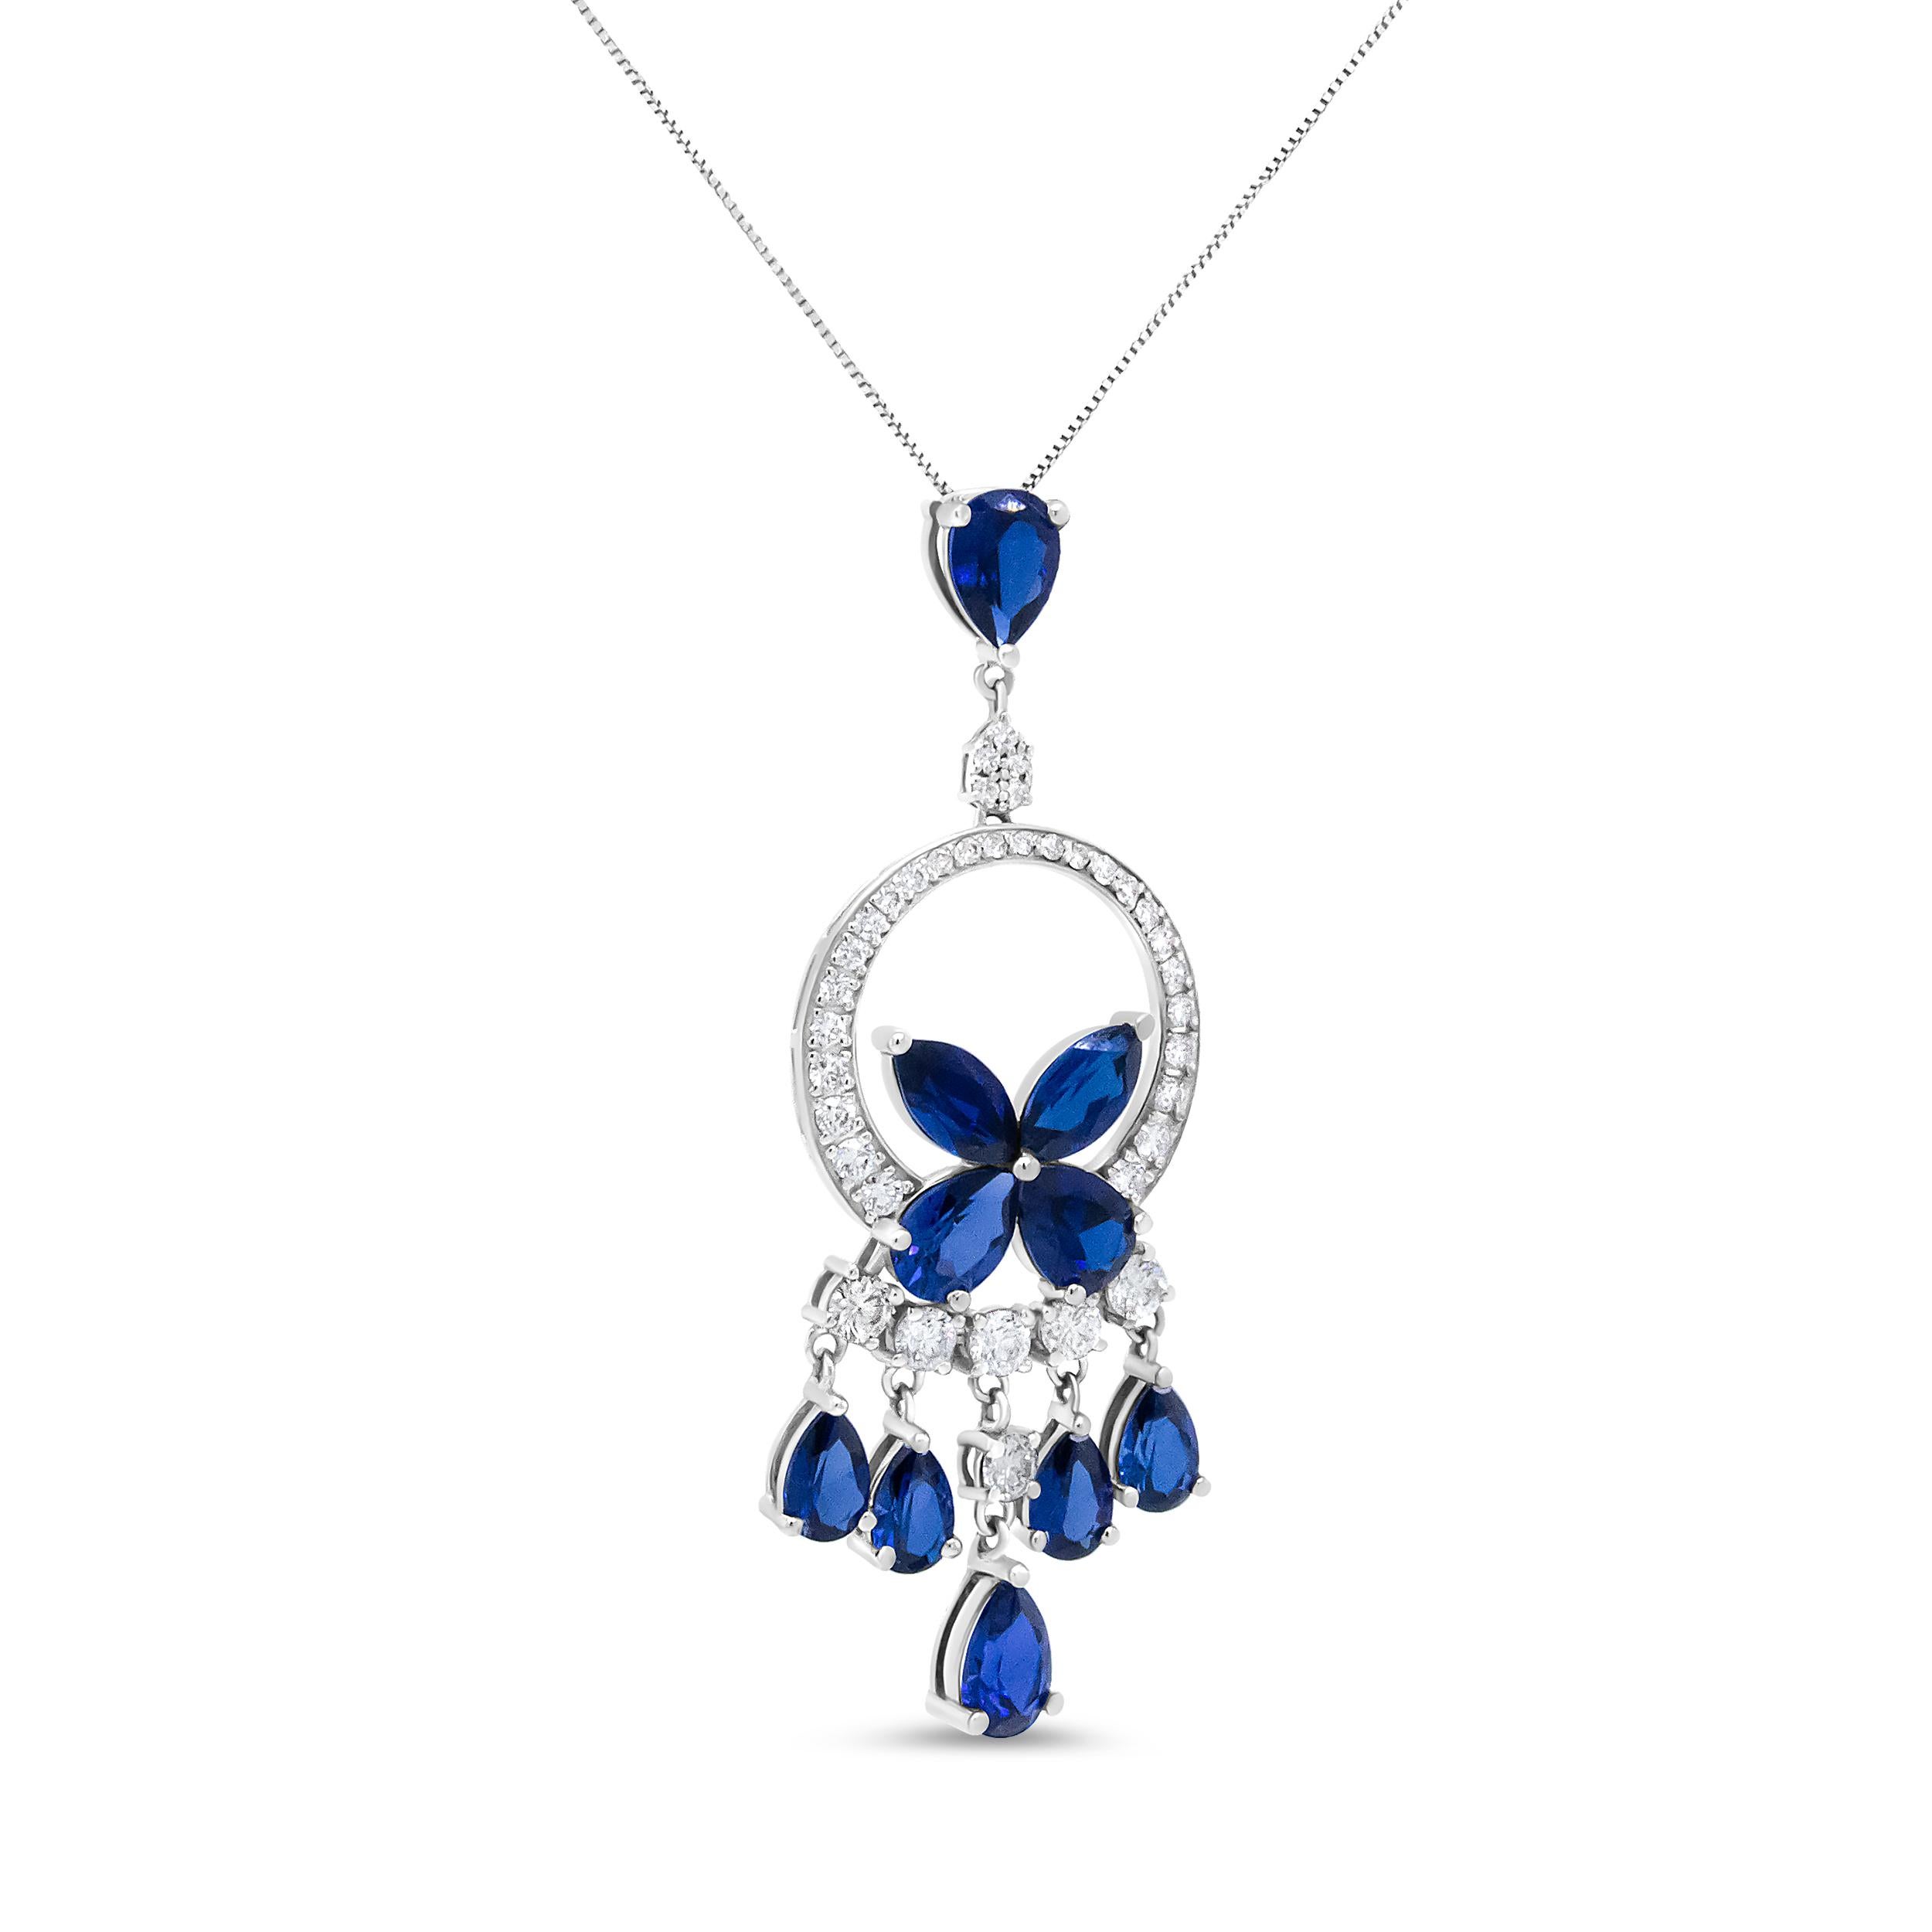 This 18k white gold pendant necklace is a showstopper! It is comprised of a stunning collection of natural gemstones and diamonds that form an openwork silhouette that cascades into a chandelier motif. The bail features a single color-treated blue